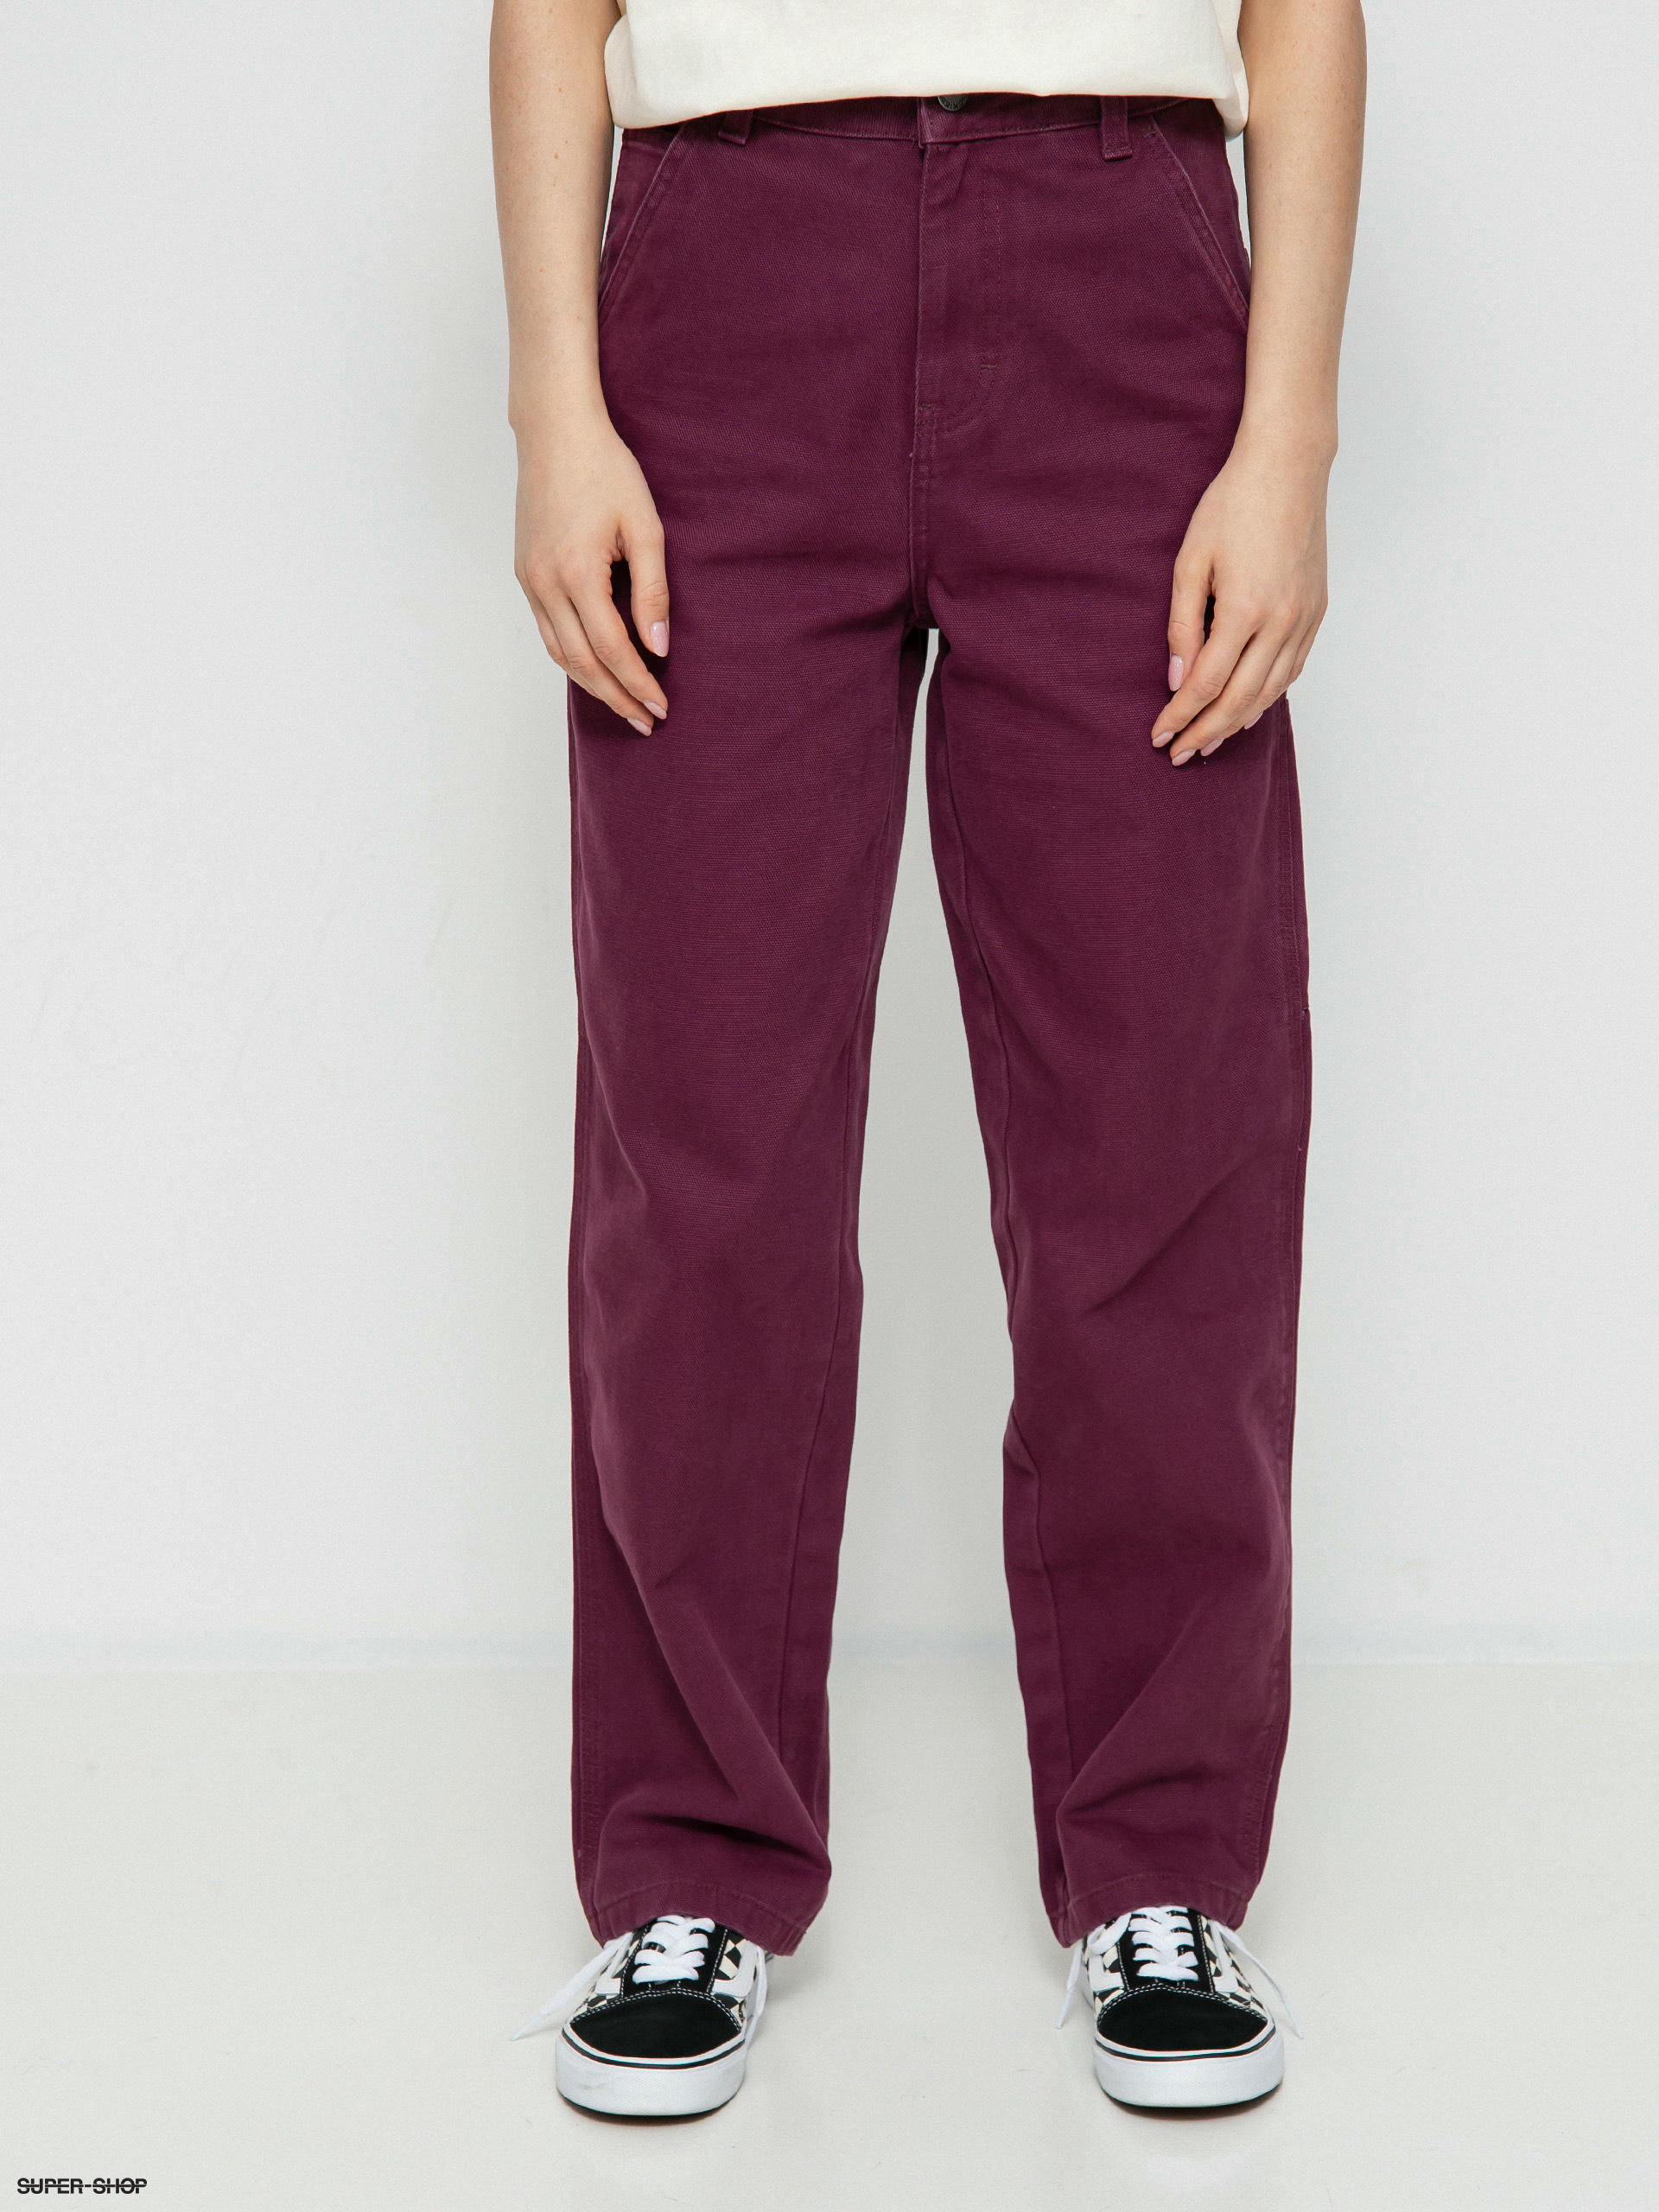 Buy Marie Claire Women Casual Wine Color Solid Trouser online